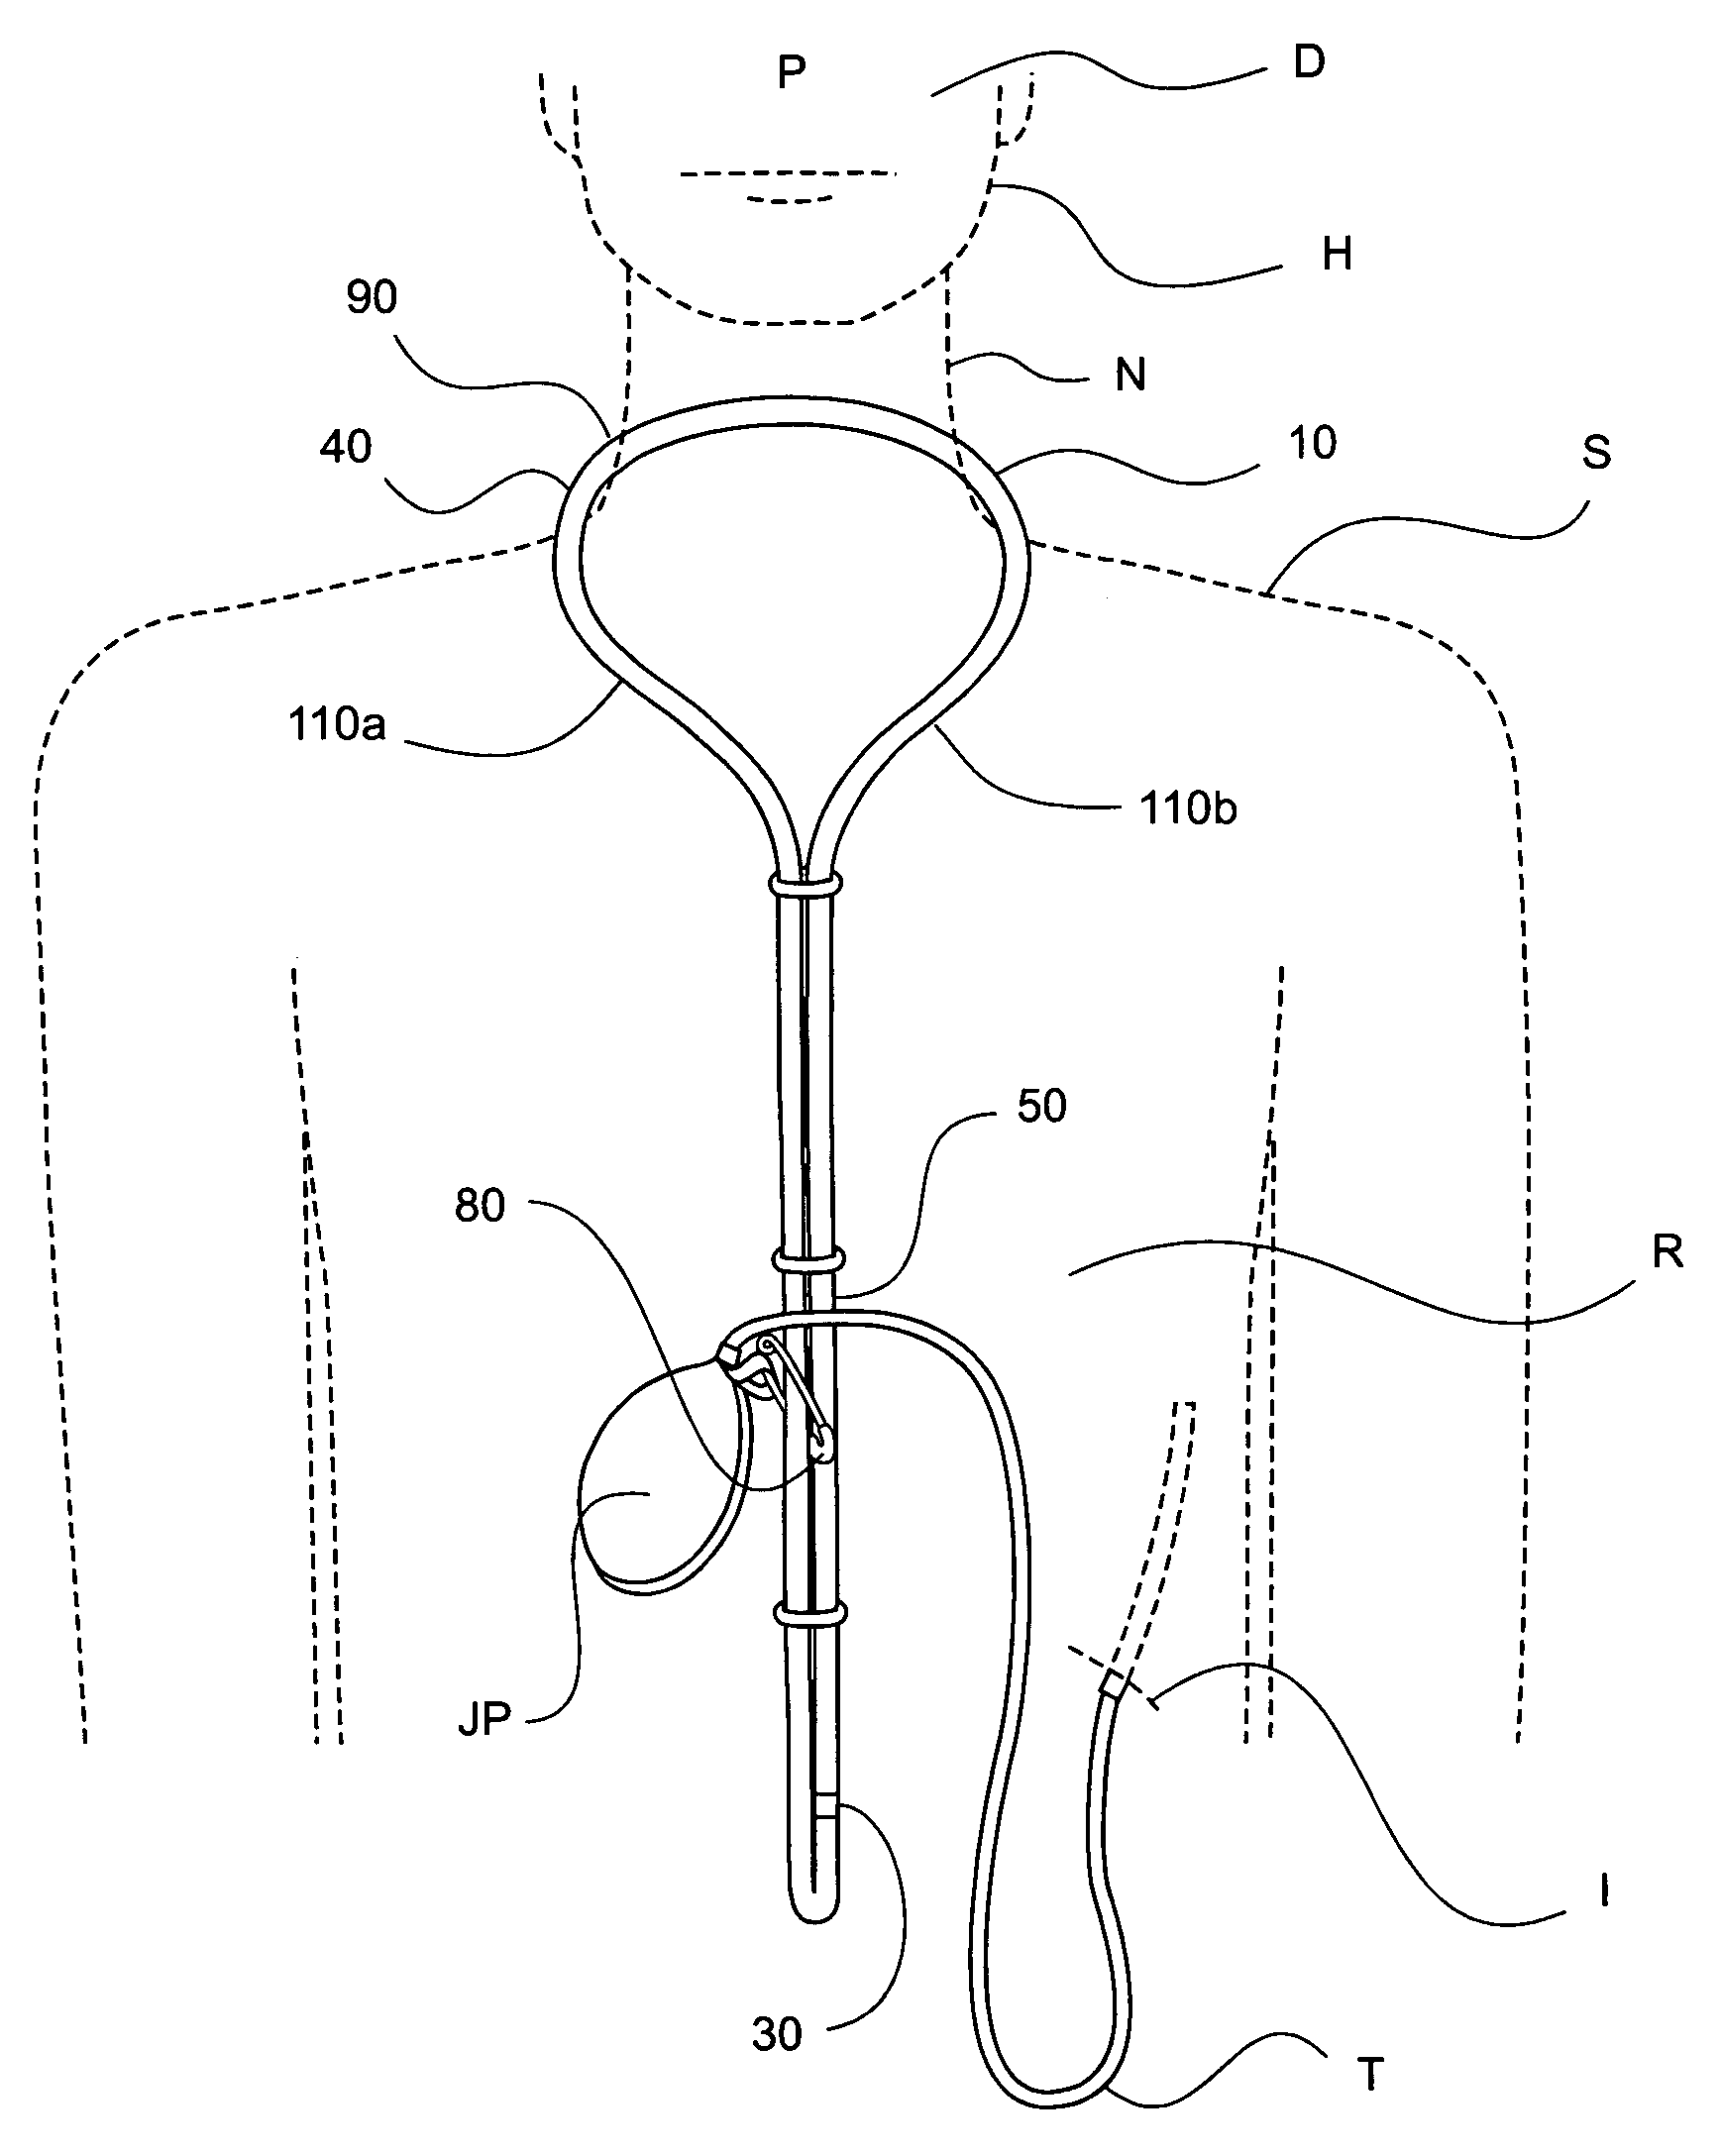 Device and method for supporting wound drainage systems